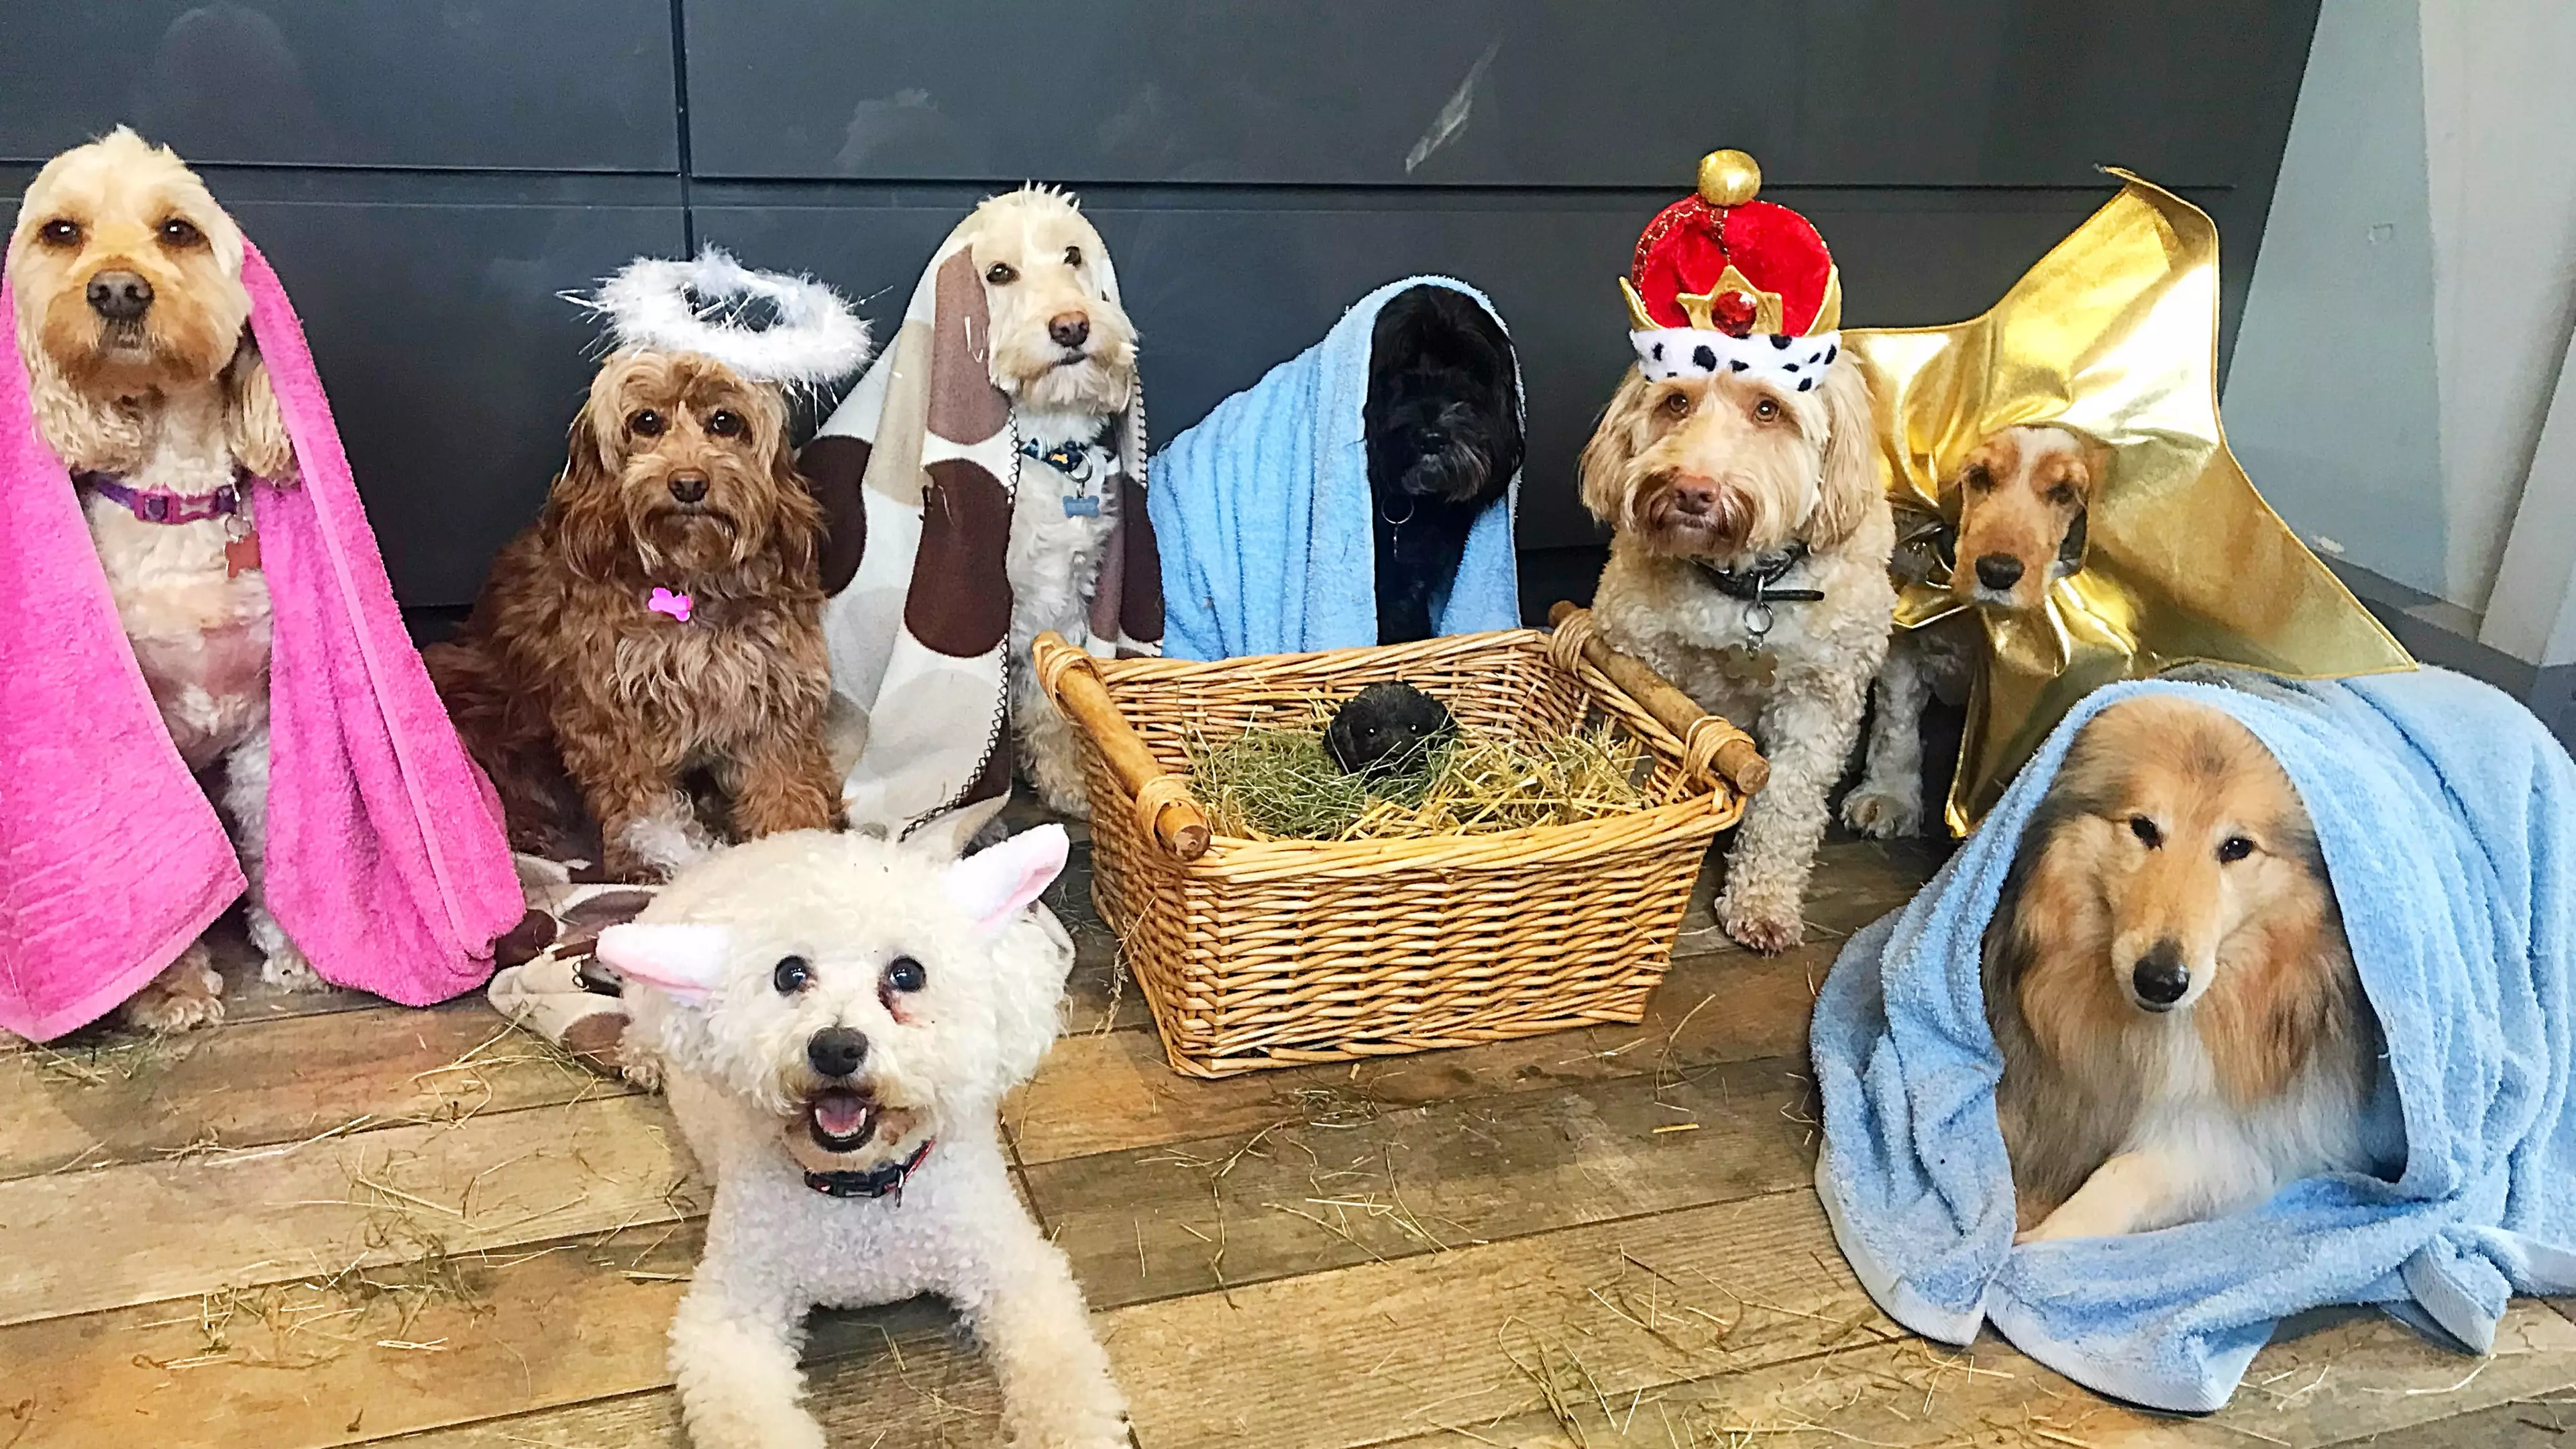 ​Dog Groomers Recreate The Nativity Scene With Adorable Pooches